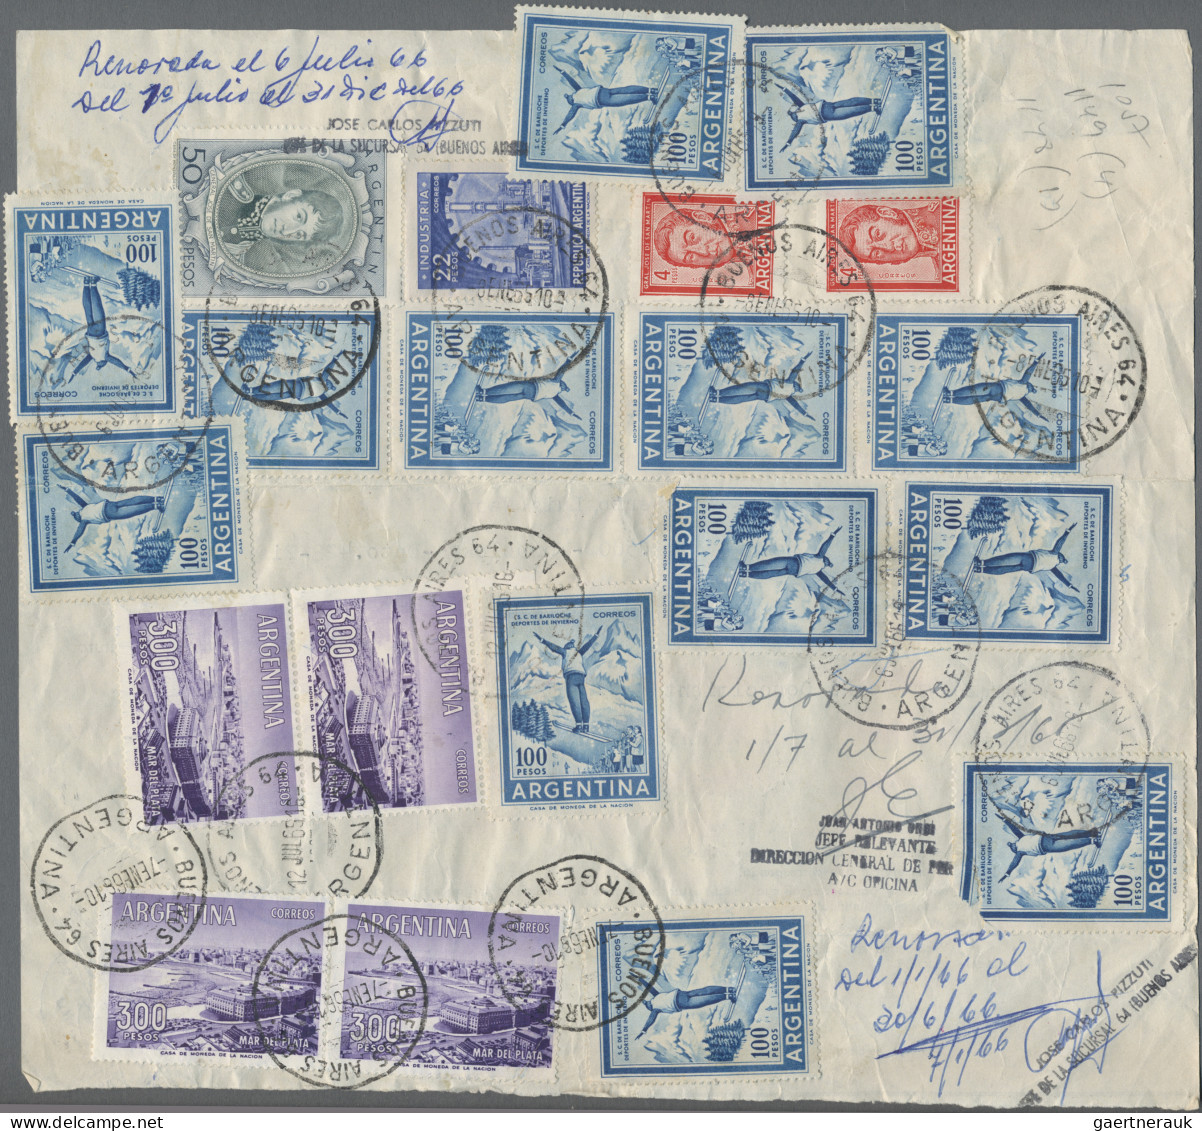 Argentina: 1900/2000's: Accumulation of covers, postcards, franked forms (subscr